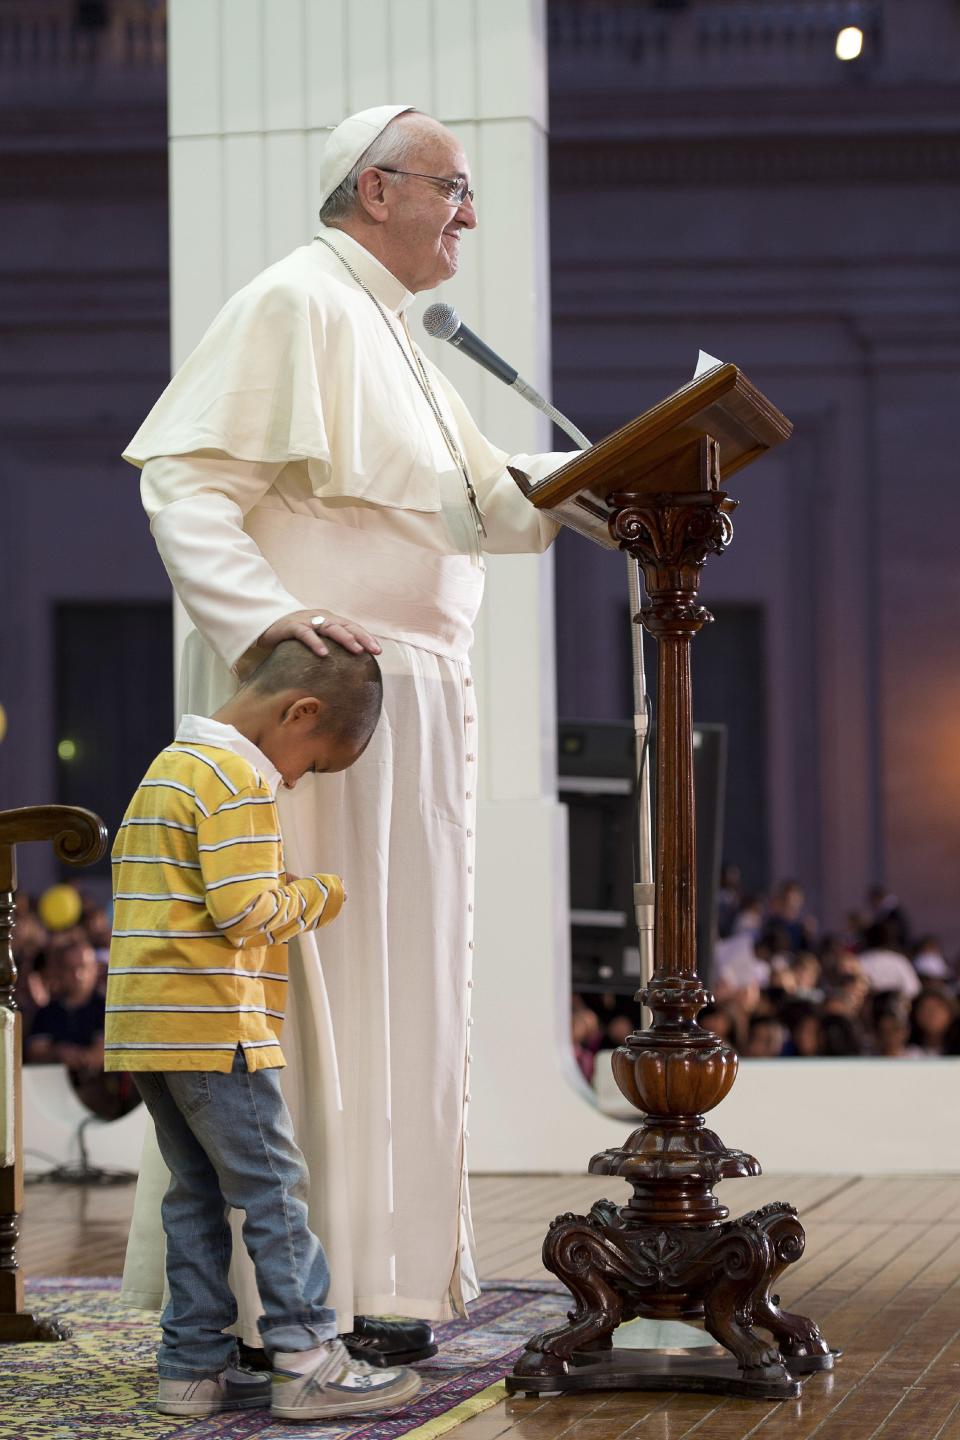 In this Saturday, Oct. 26, 2013 photo provided by the Vatican newspaper L'Osservatore Romano, Pope Francis touches a boy's head, no name available, as he delivers his speech during an audience with families in St. Peter's Square gathered for the Pontifical Council for the Familyís plenary assembly, at the Vatican. A young boy, part of a group of children sitting around the stage where the pontiff was delivering his message to families, played around Pope Francis as he continued delivering his speech, occasionally patting the boy's head. (AP Photo/L'Osservatore Romano)